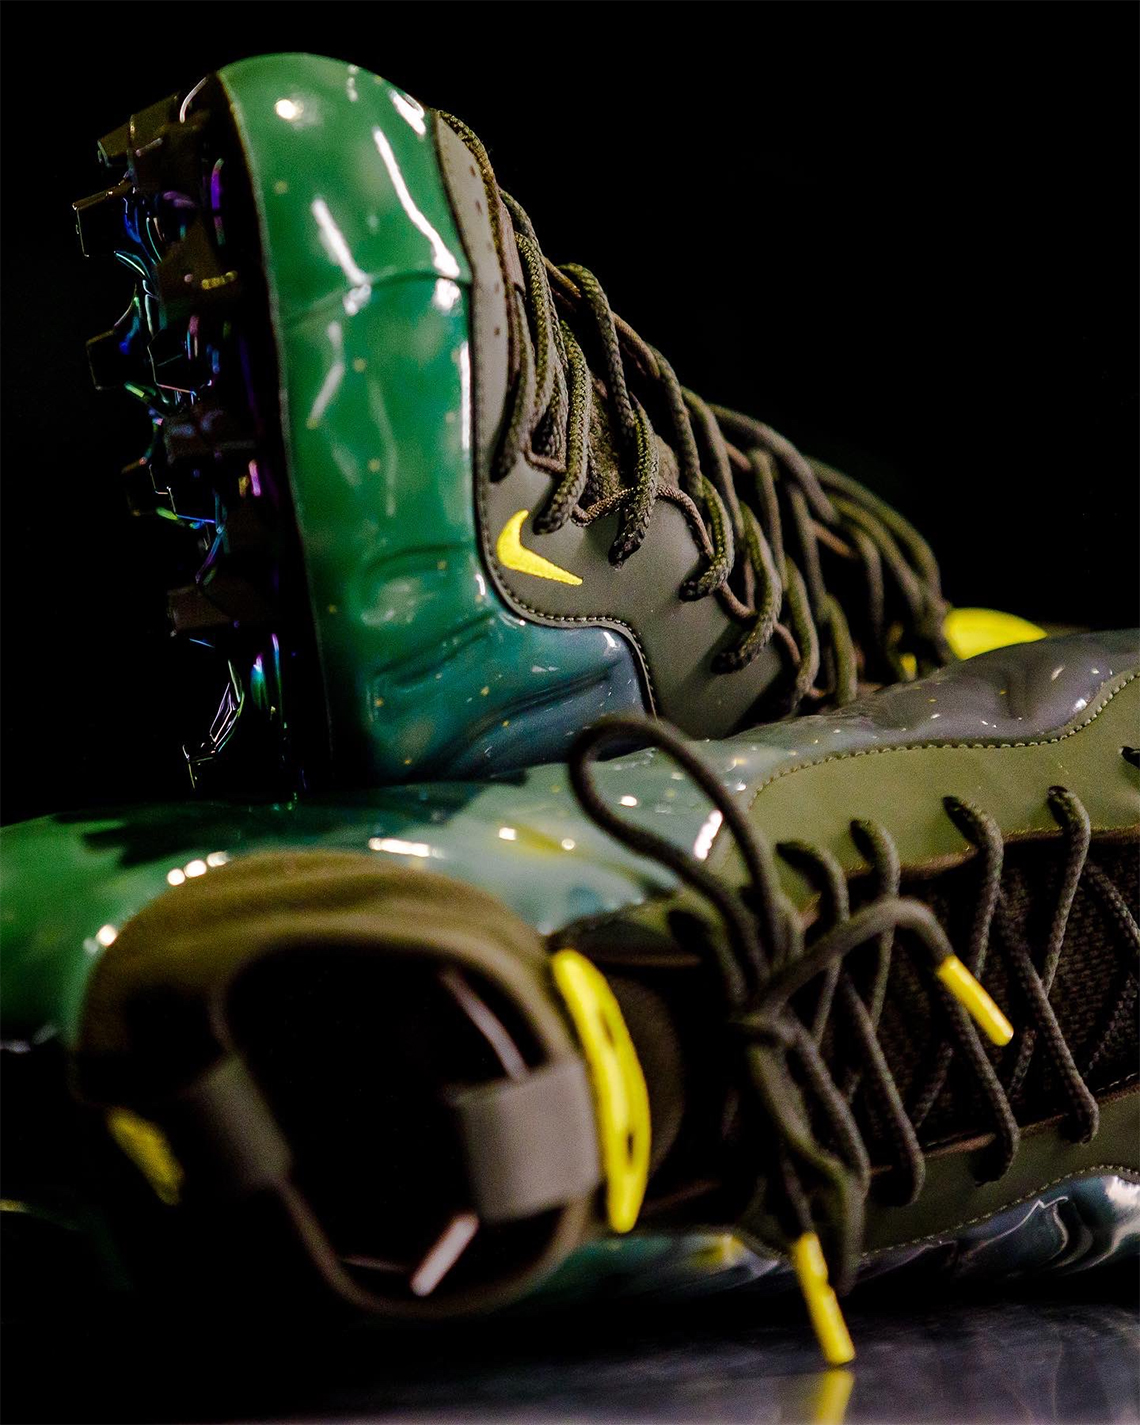 Nike Gives Oregon Color-Changing Dunk Cleats for This Week's Game